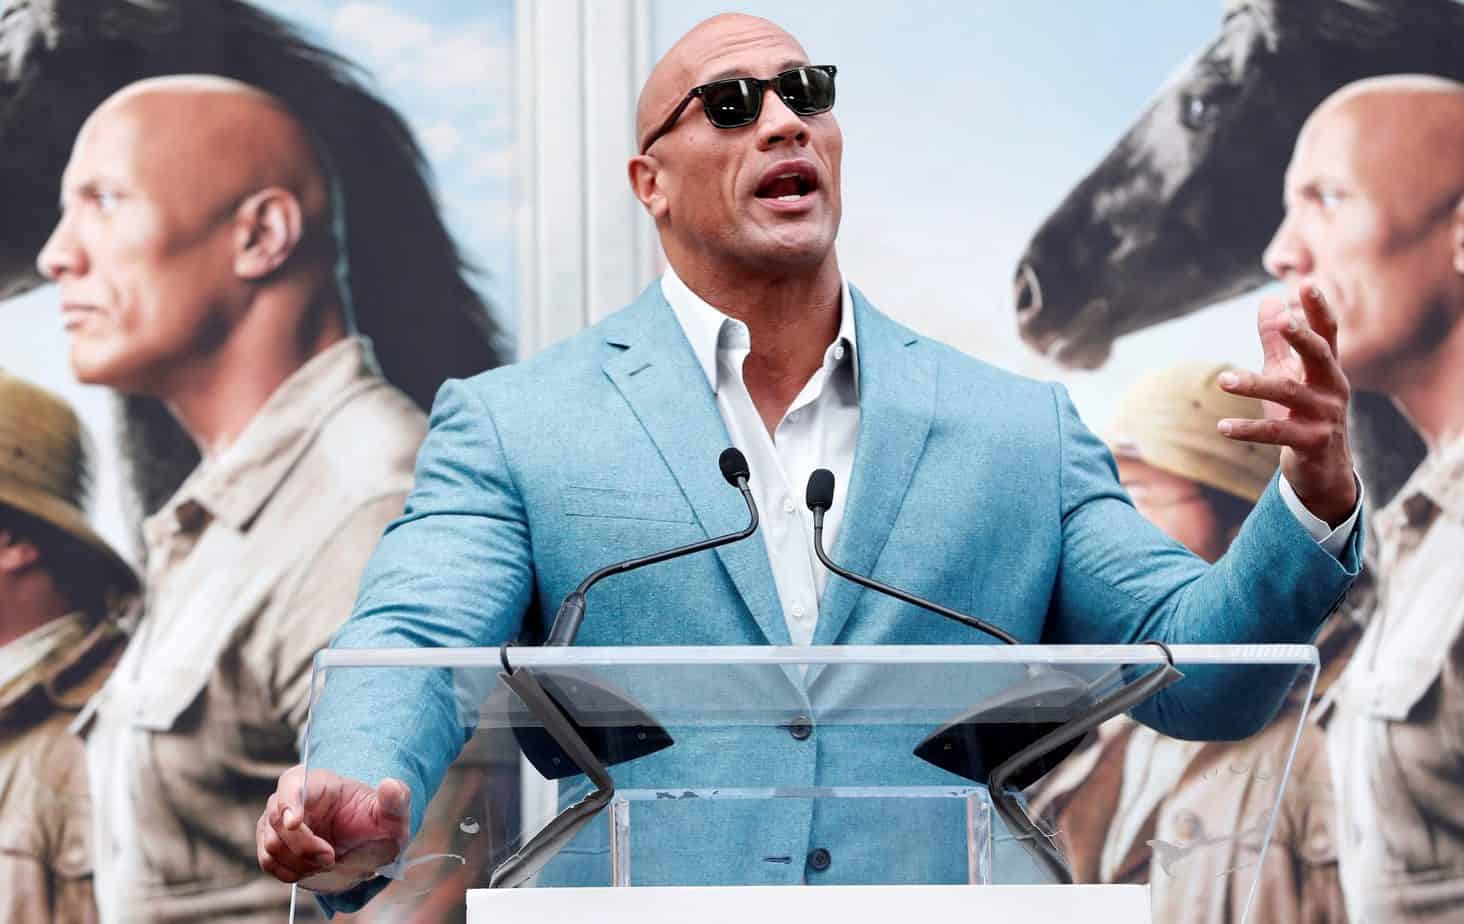 Dwayne "The Rock" Johnson buys XFL along with other investors for $ 15 million